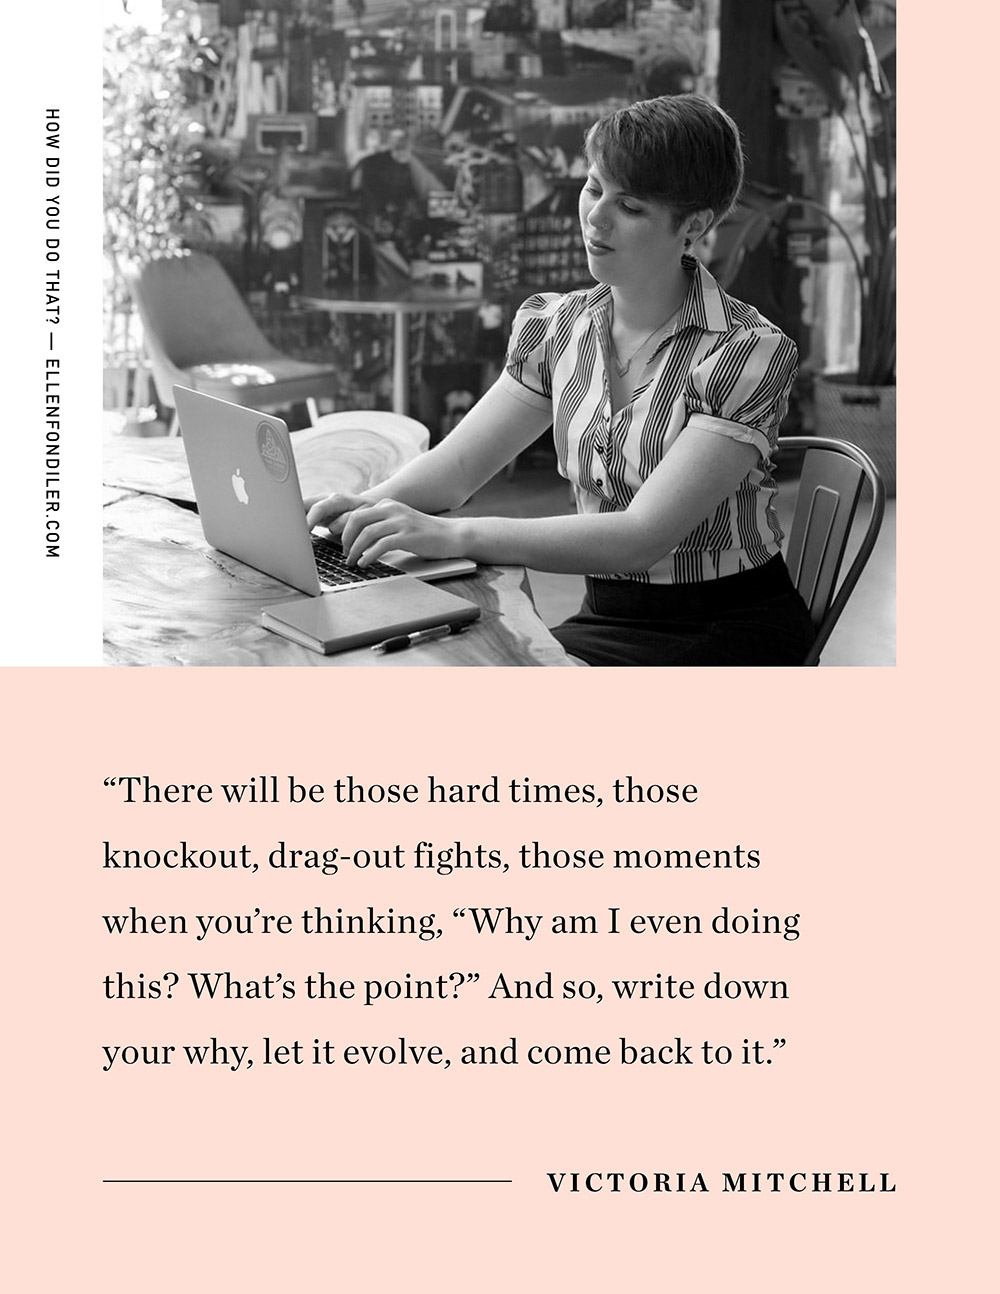 Ellen Fondiler | How Did You Do That: An Interview With Victoria Mitchell